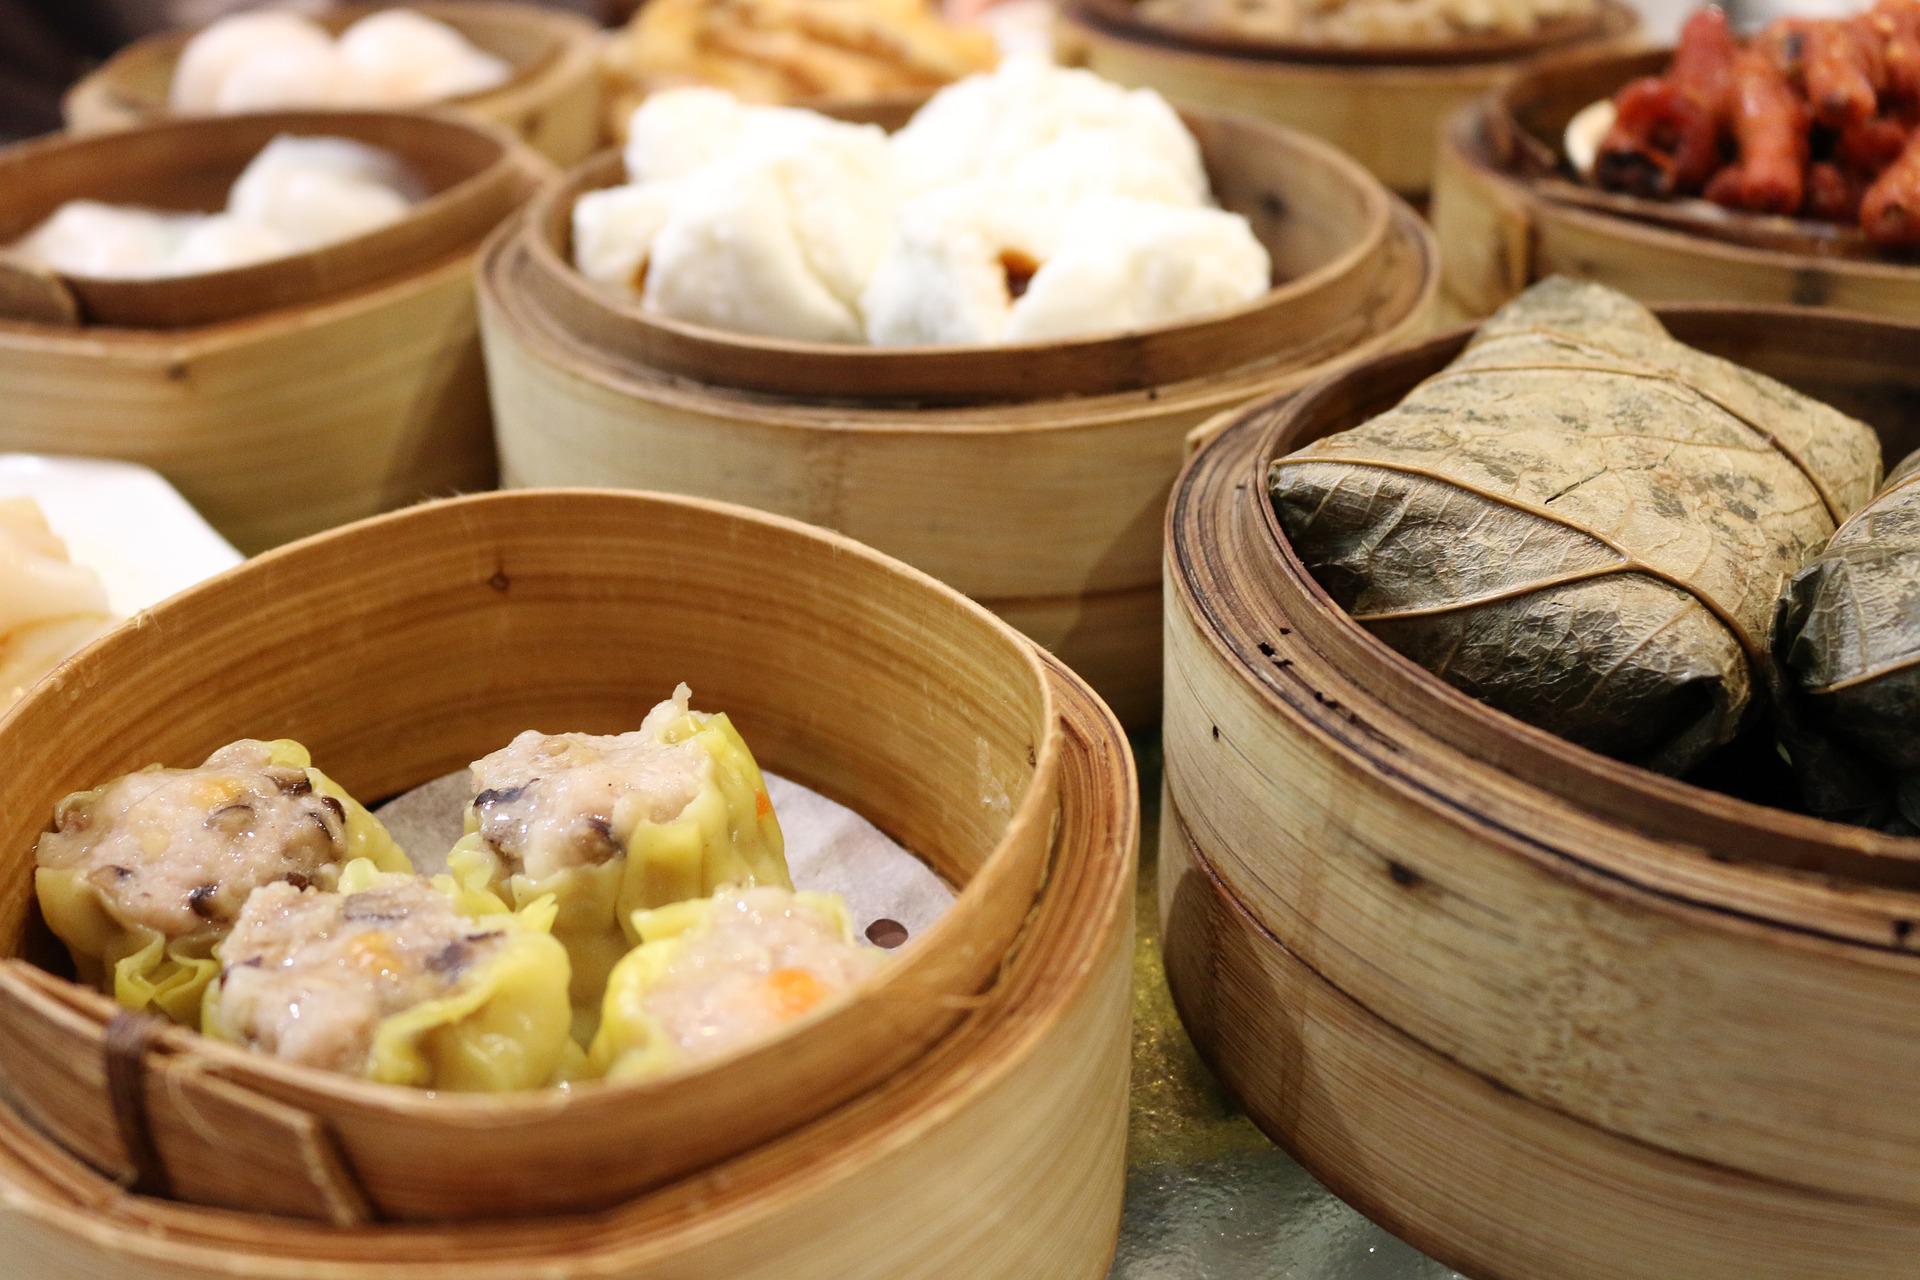 Top 5 Authentic Chinese Foods and Drinks To Try